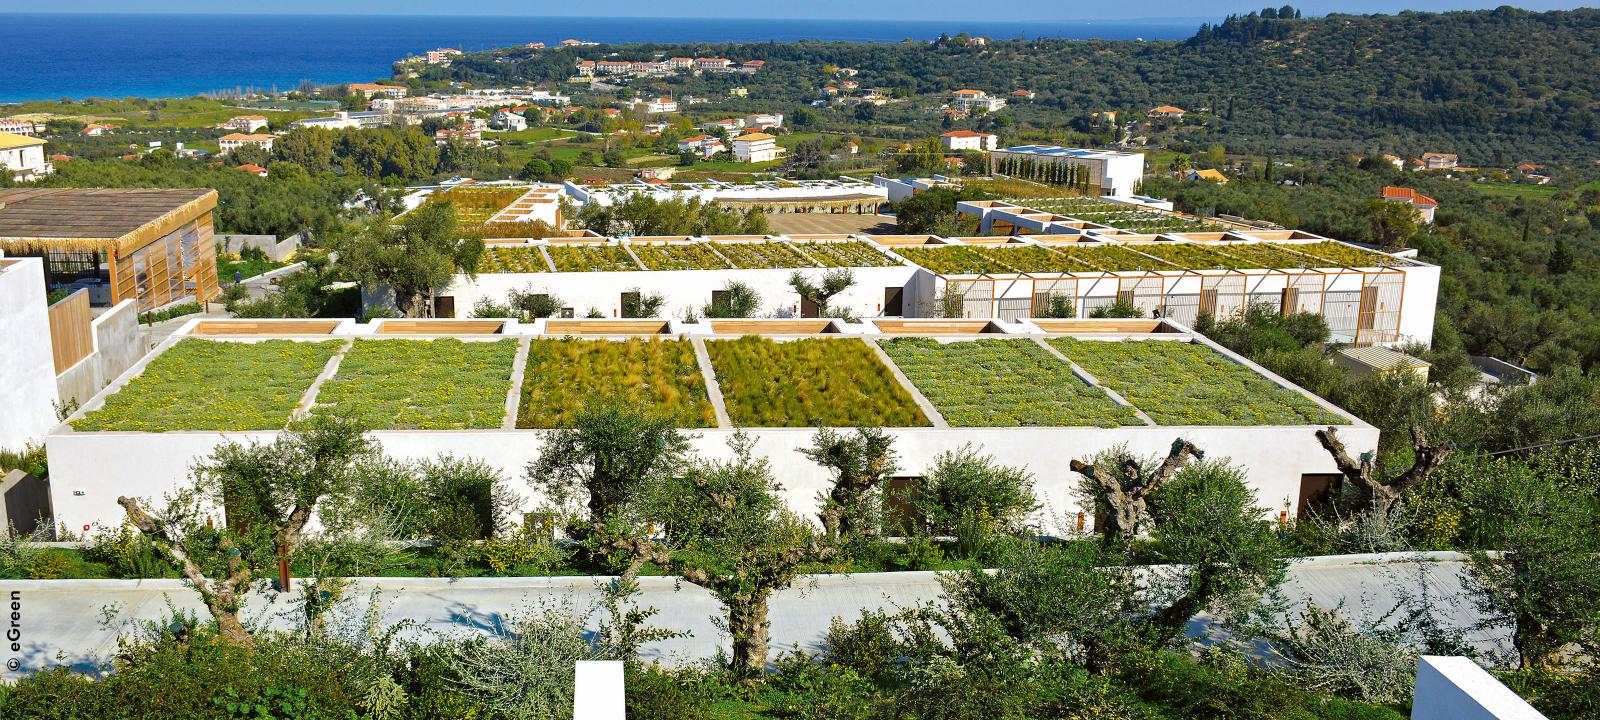 Extensive green roofs